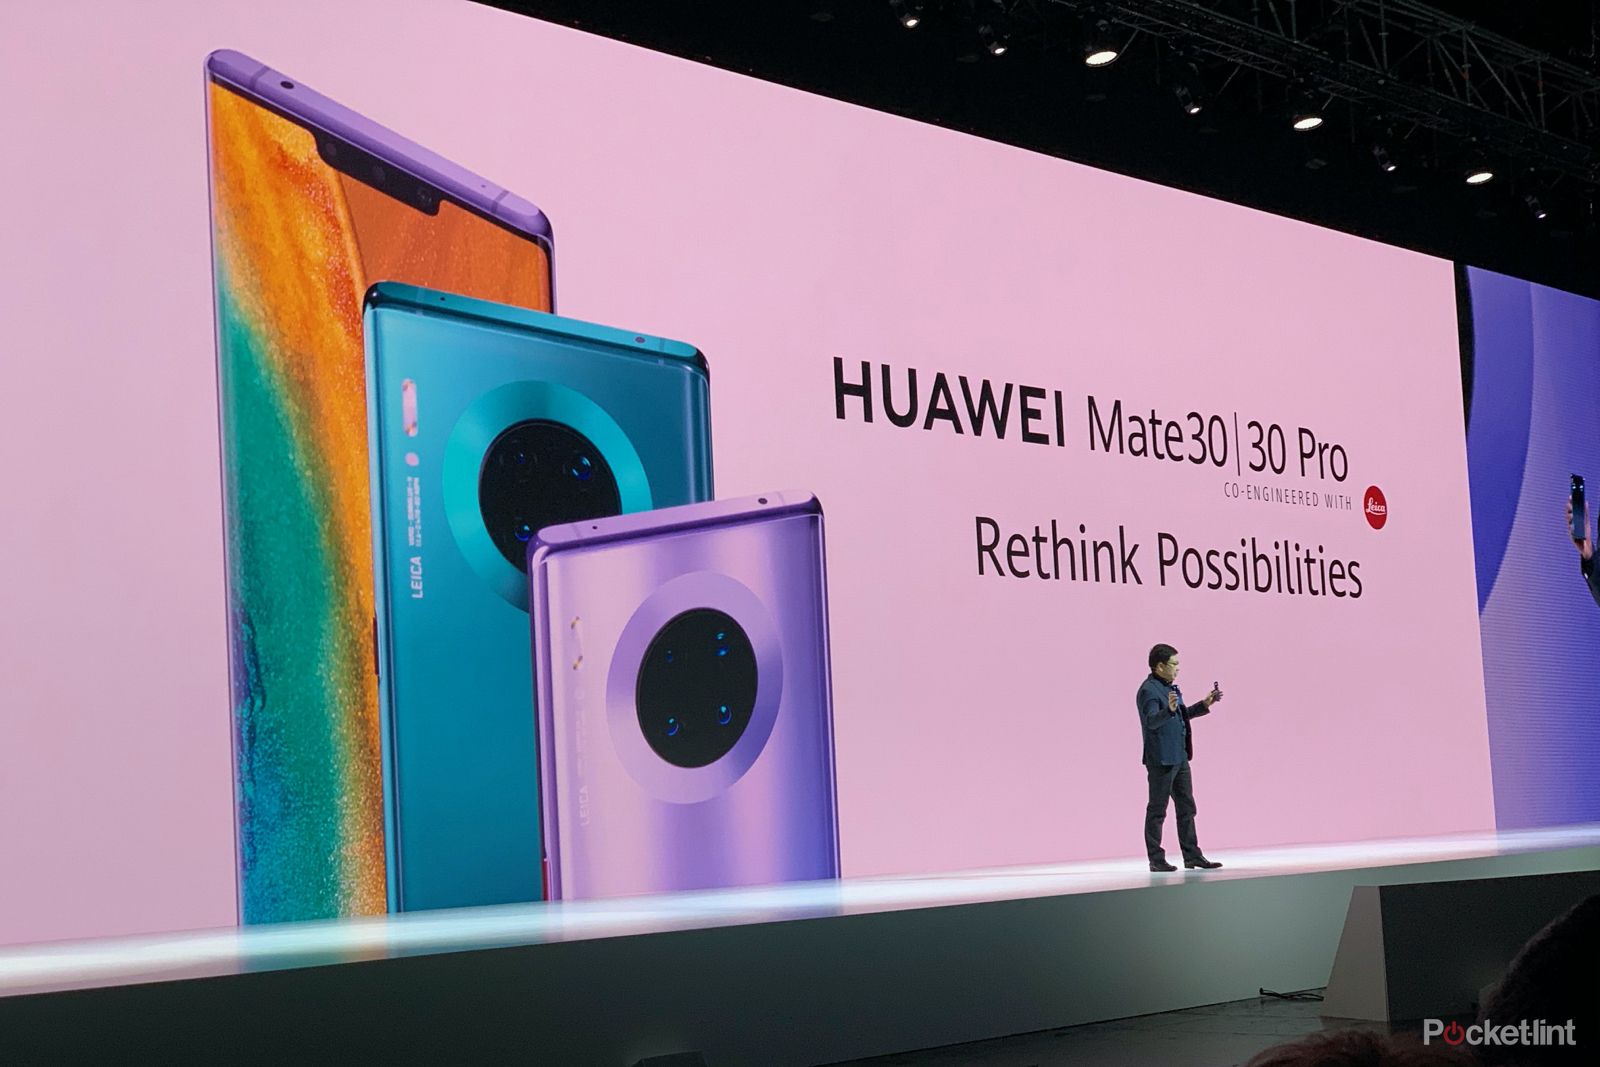 Huawei announces the Mate 30 Series including the Mate 30 Pro image 2